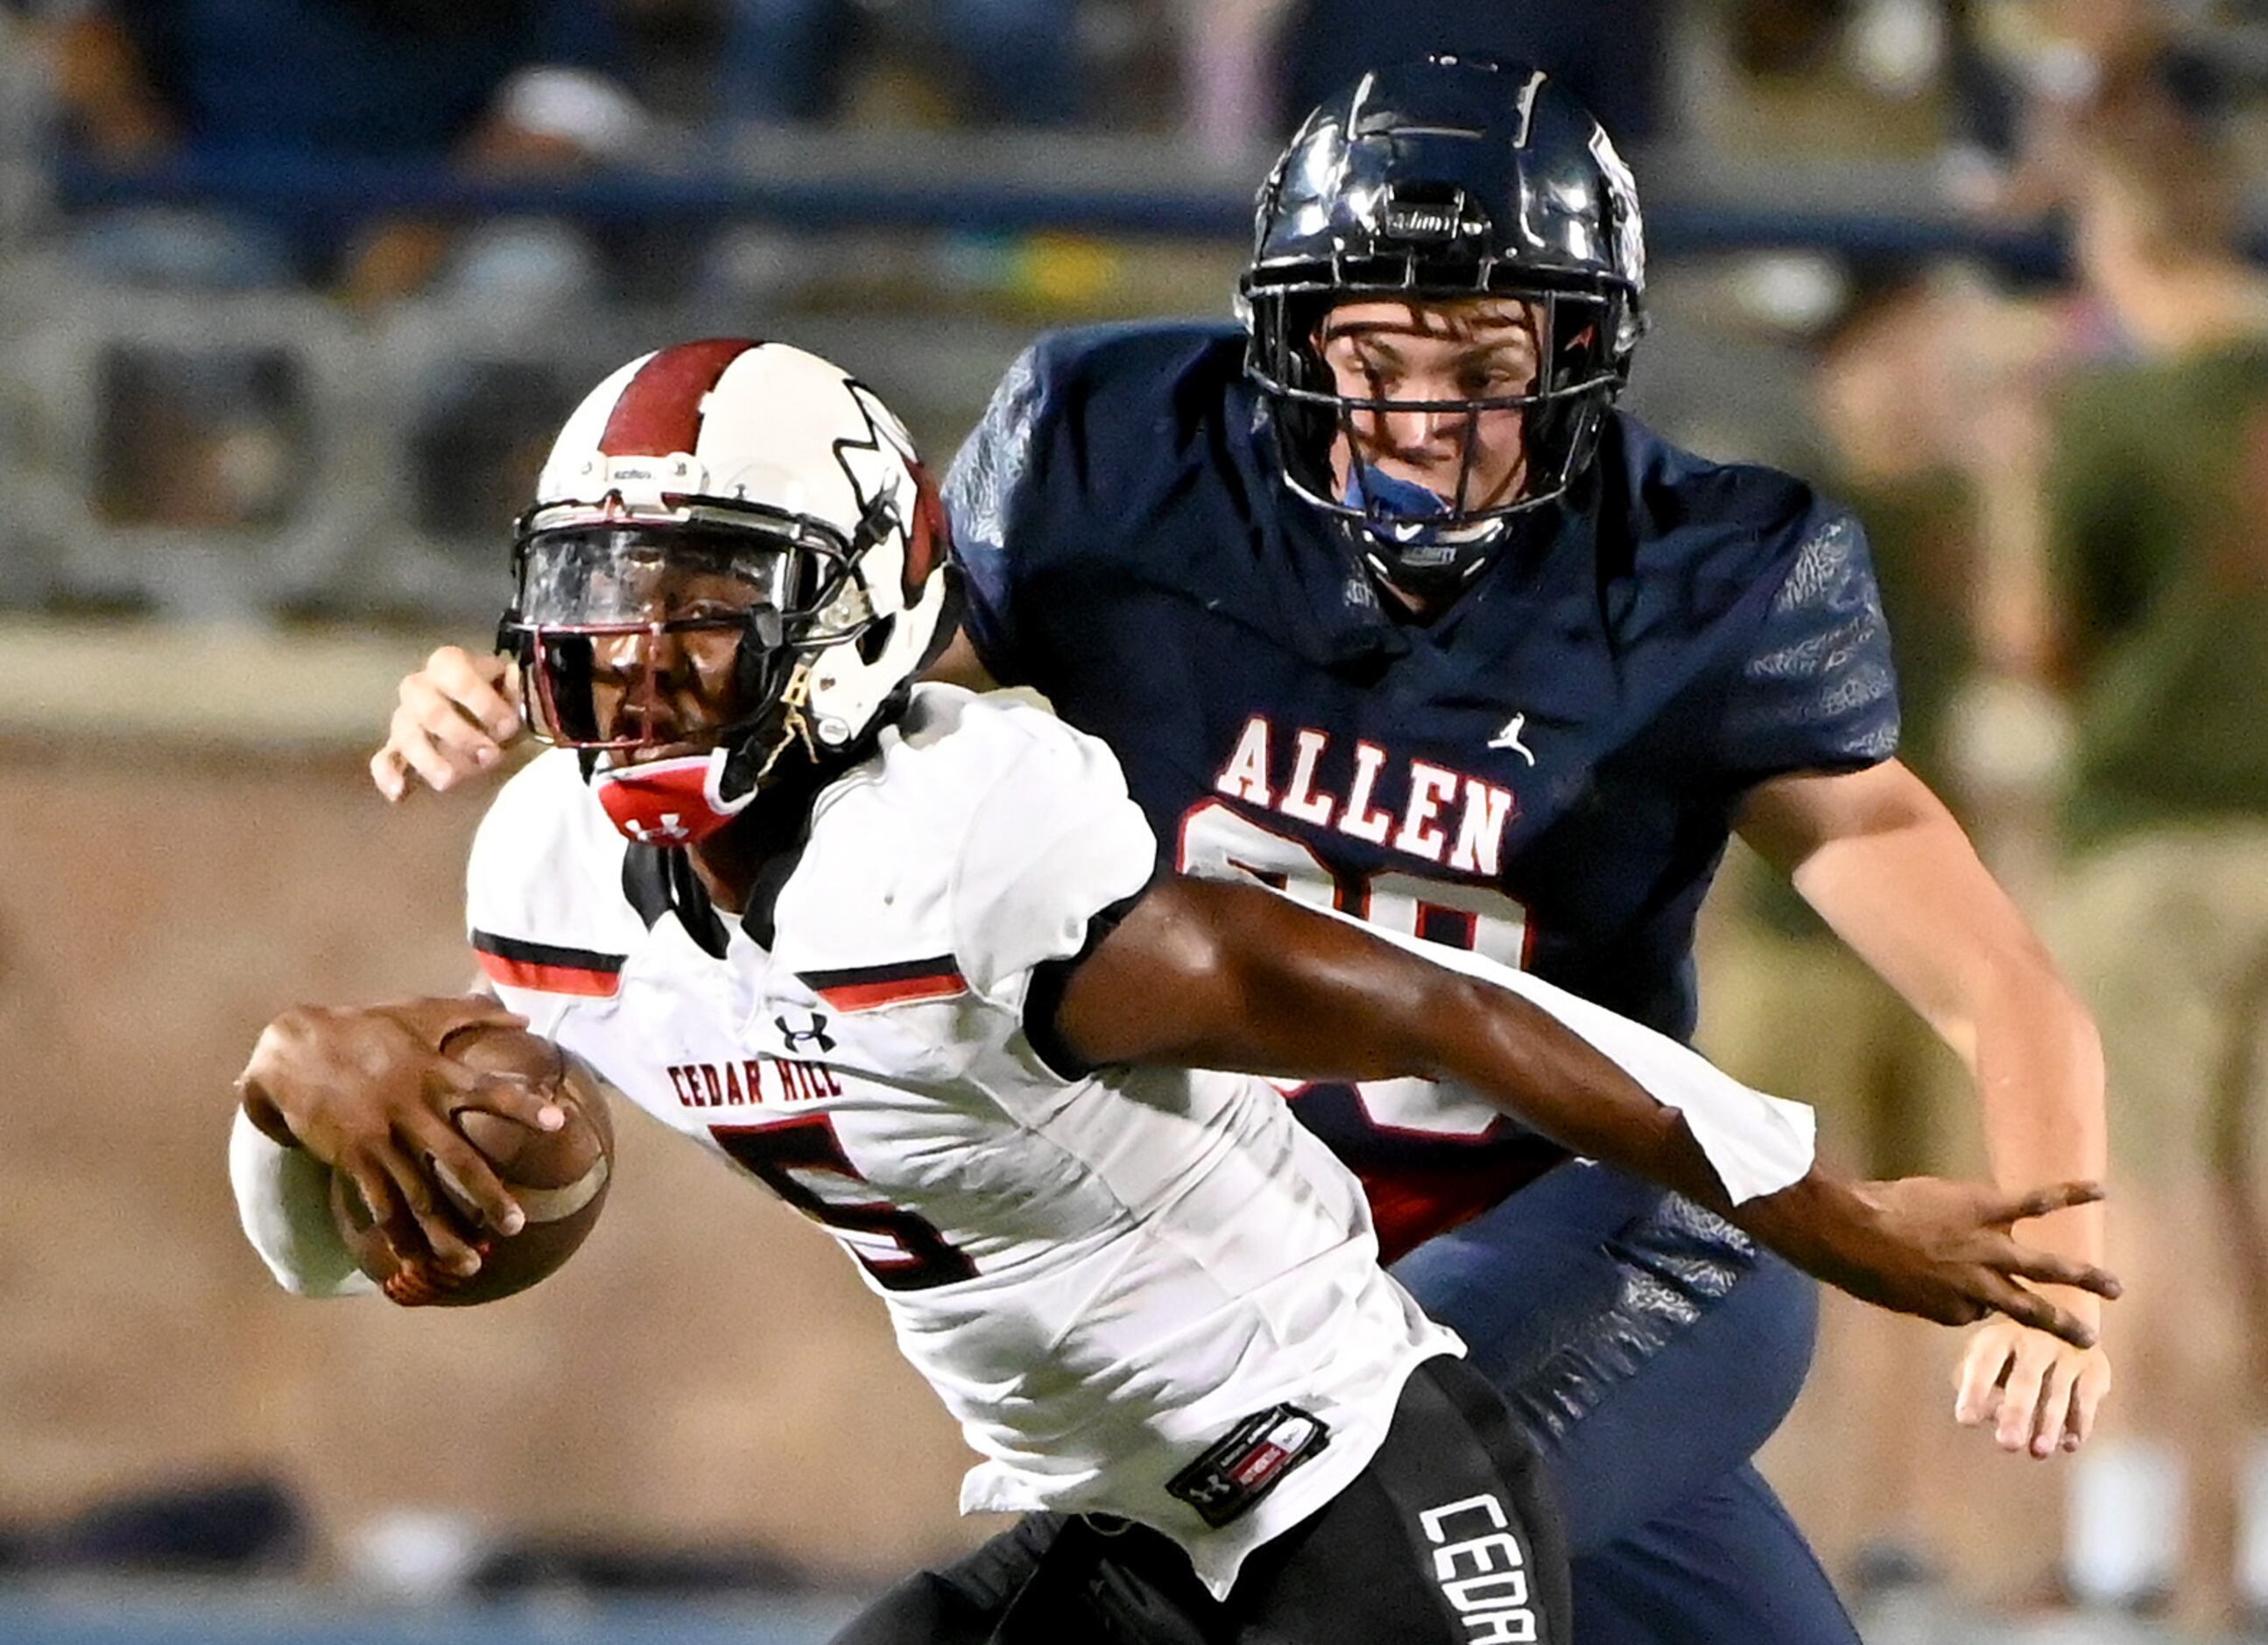 Cedar Hill's Cedric Harden Jr. (5) tries to get away from a tackle attempt by Allen’s Blake...